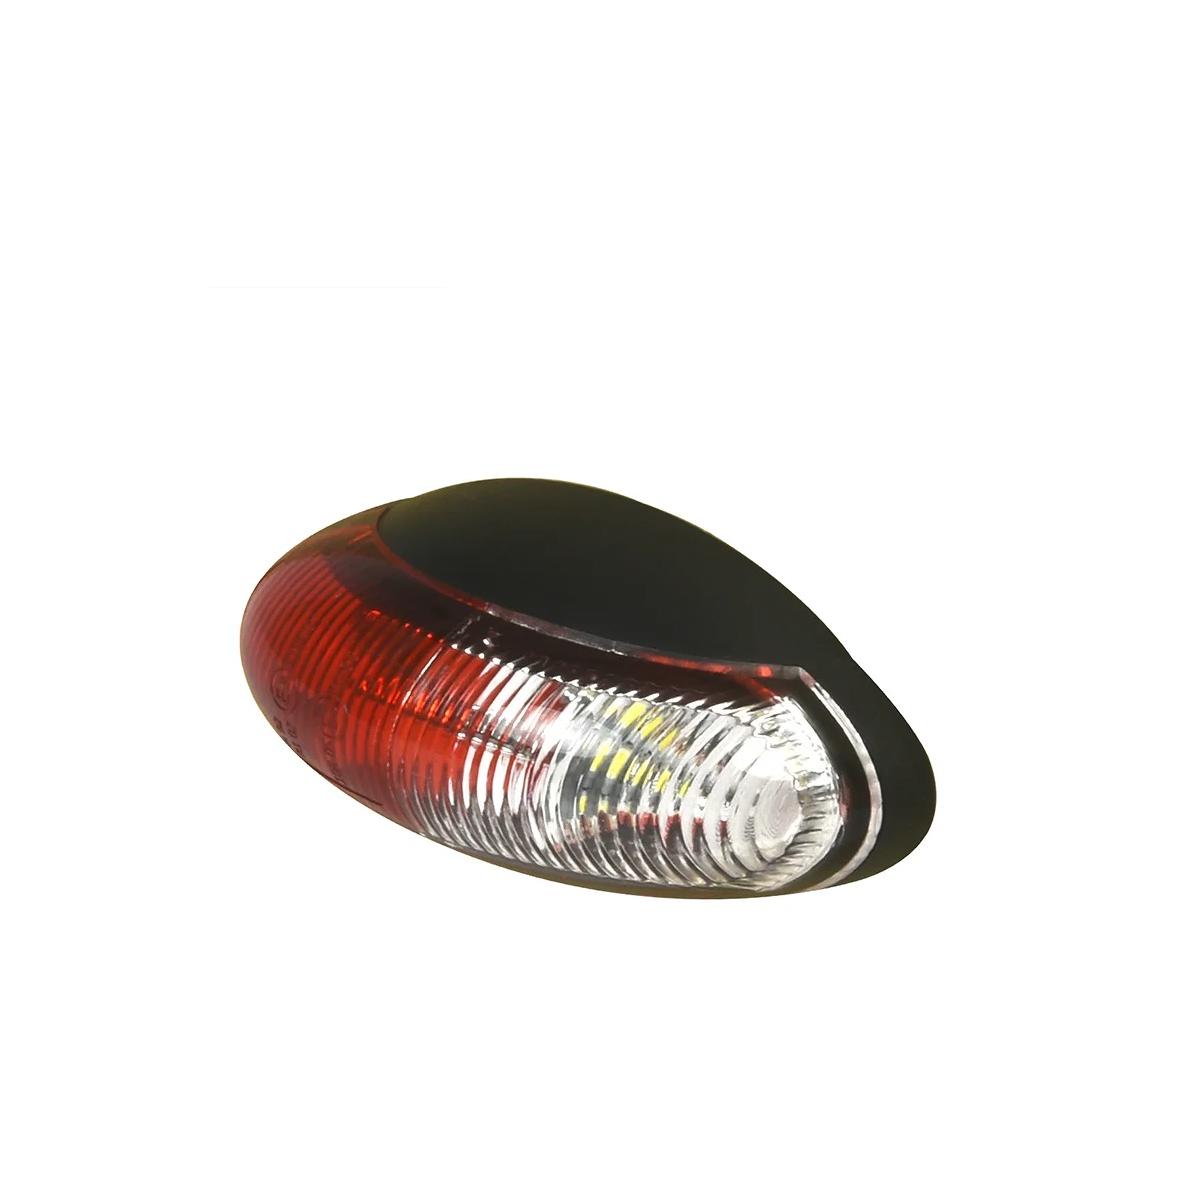 Pro Plus LED Umrissleuchte, 60x34mm, 10-30V, rot/weiß bei Camping